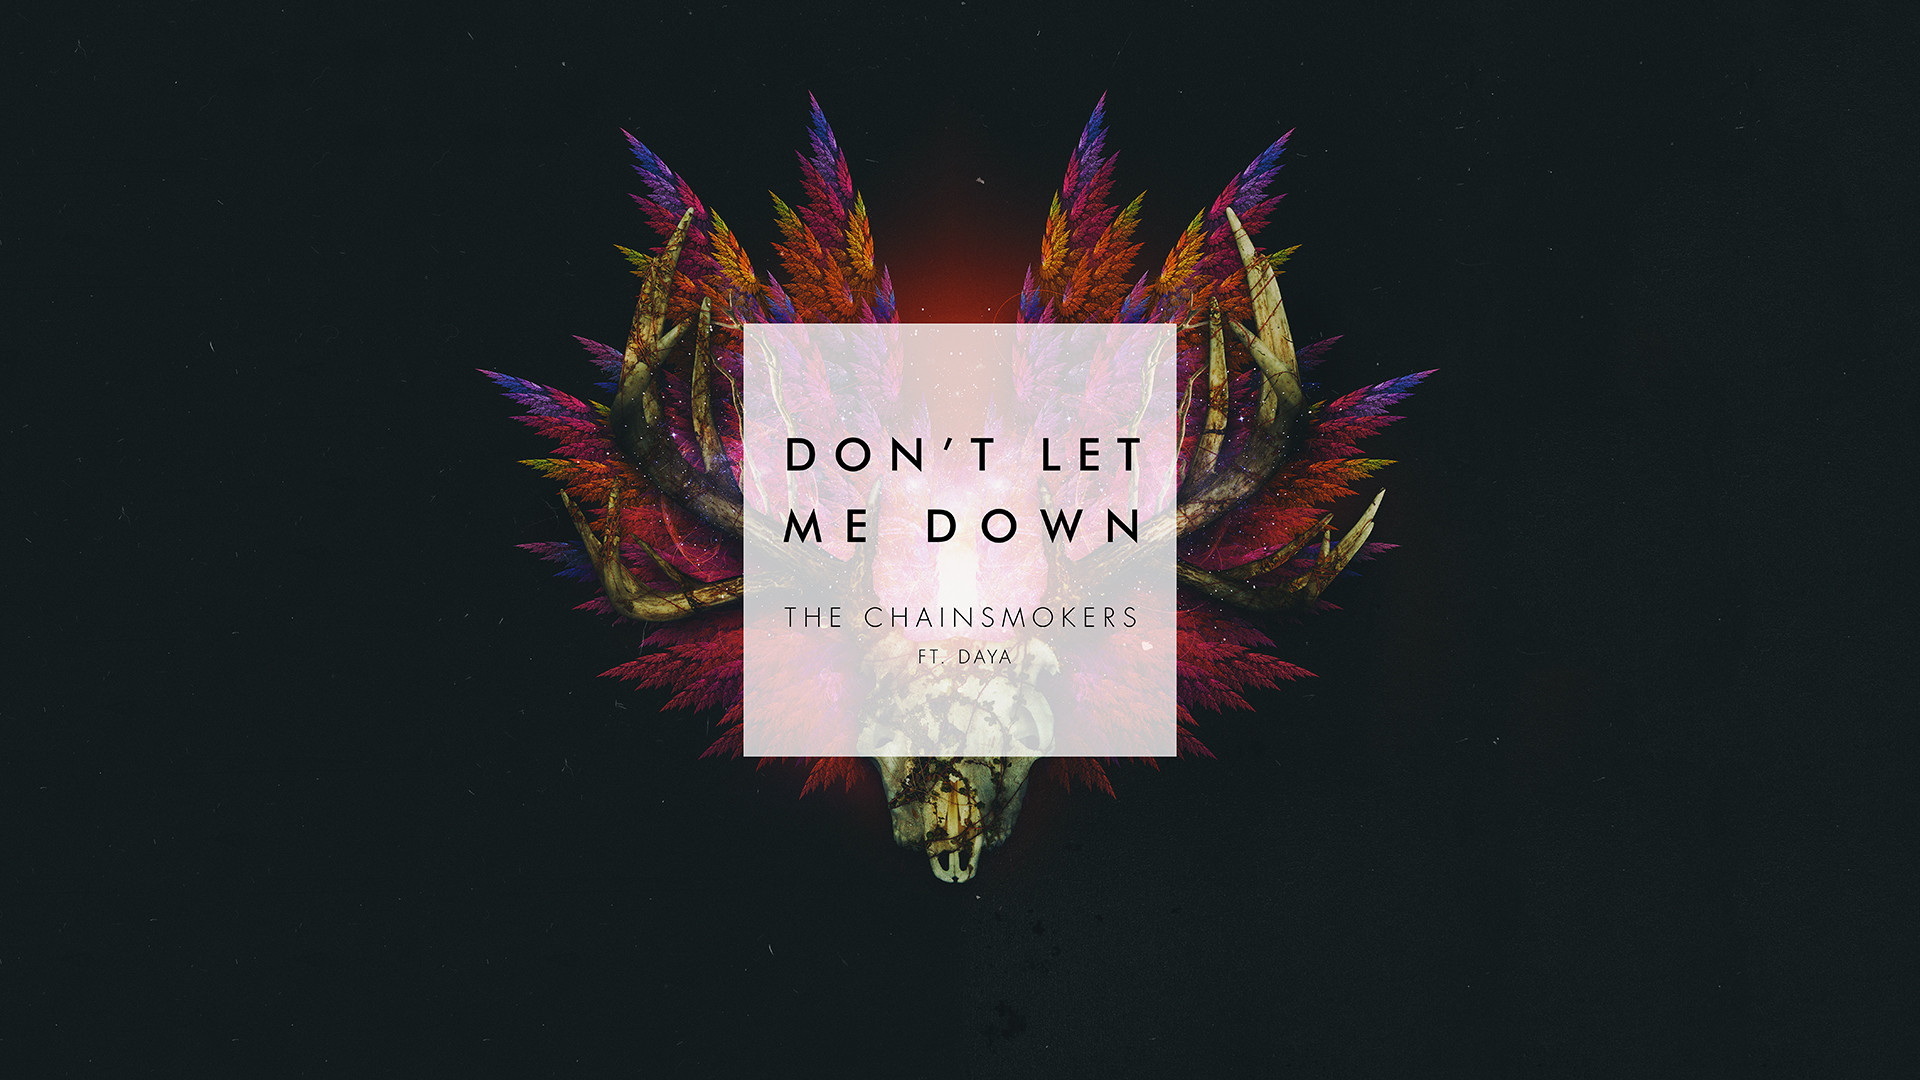 1920x1080 The Chainsmokers - Don't Let Me Down